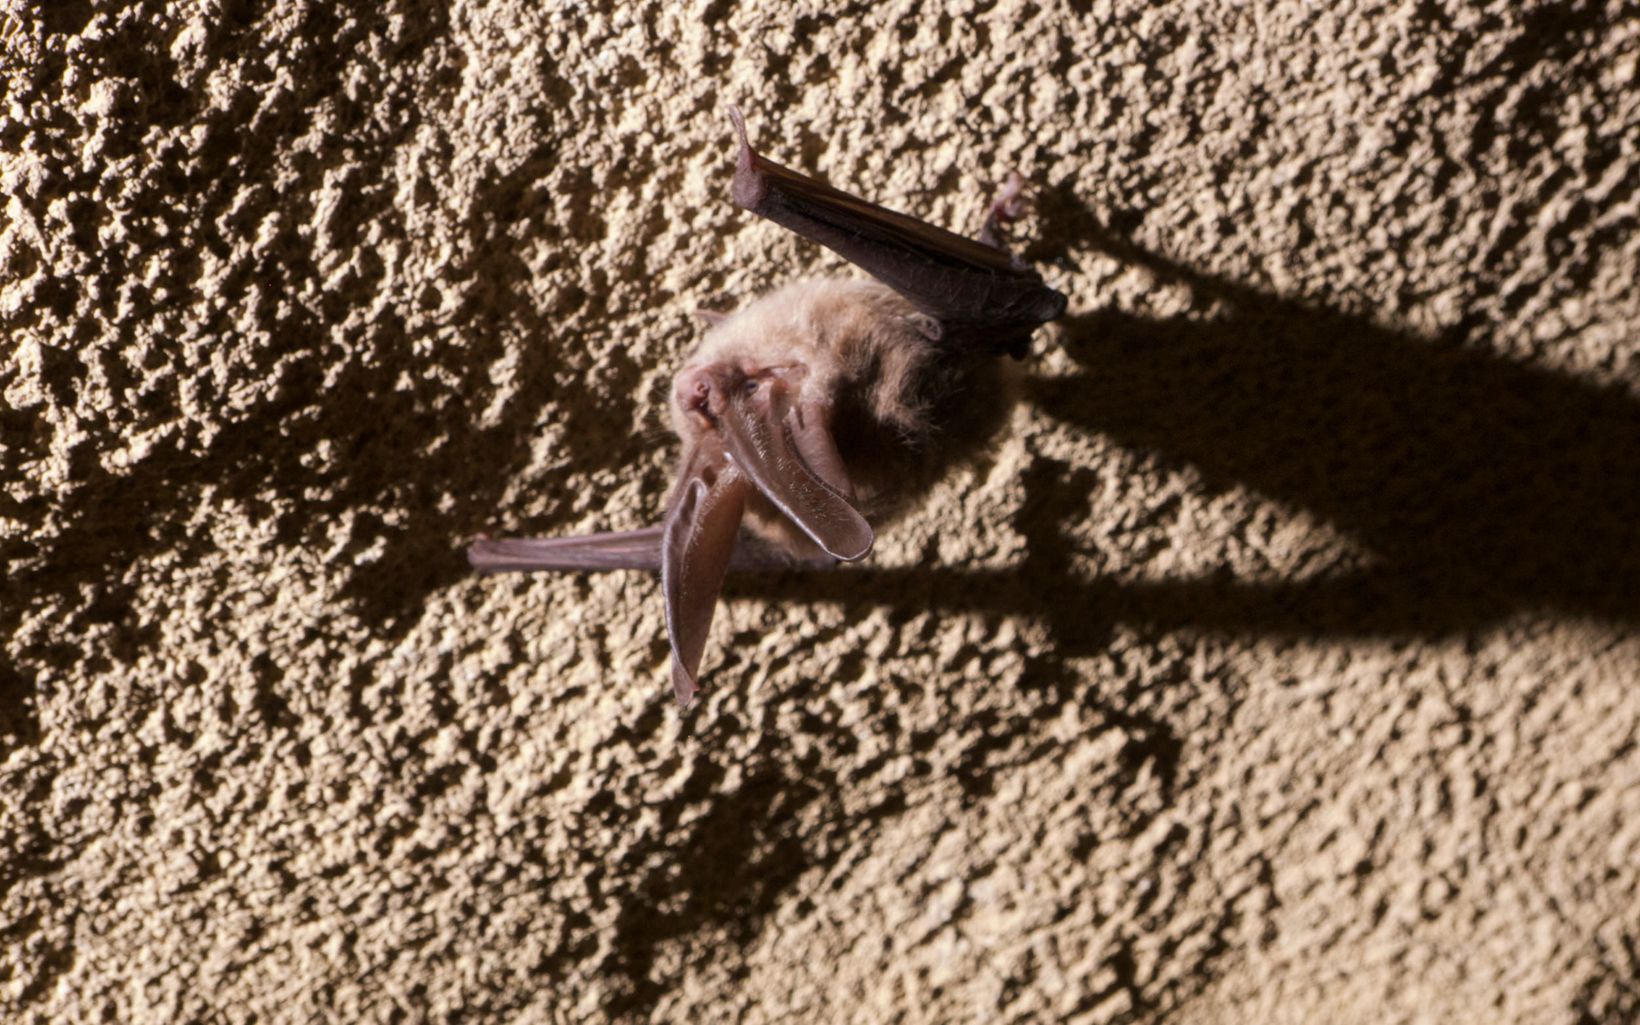 Virginia Big-Eared Bat The Virginia big-eared bat has ears that are about an inch long. This species hibernates in caves near oak-hickory forests. You can find them at our Brooklyn Heights Preserve. © Dave Riggs